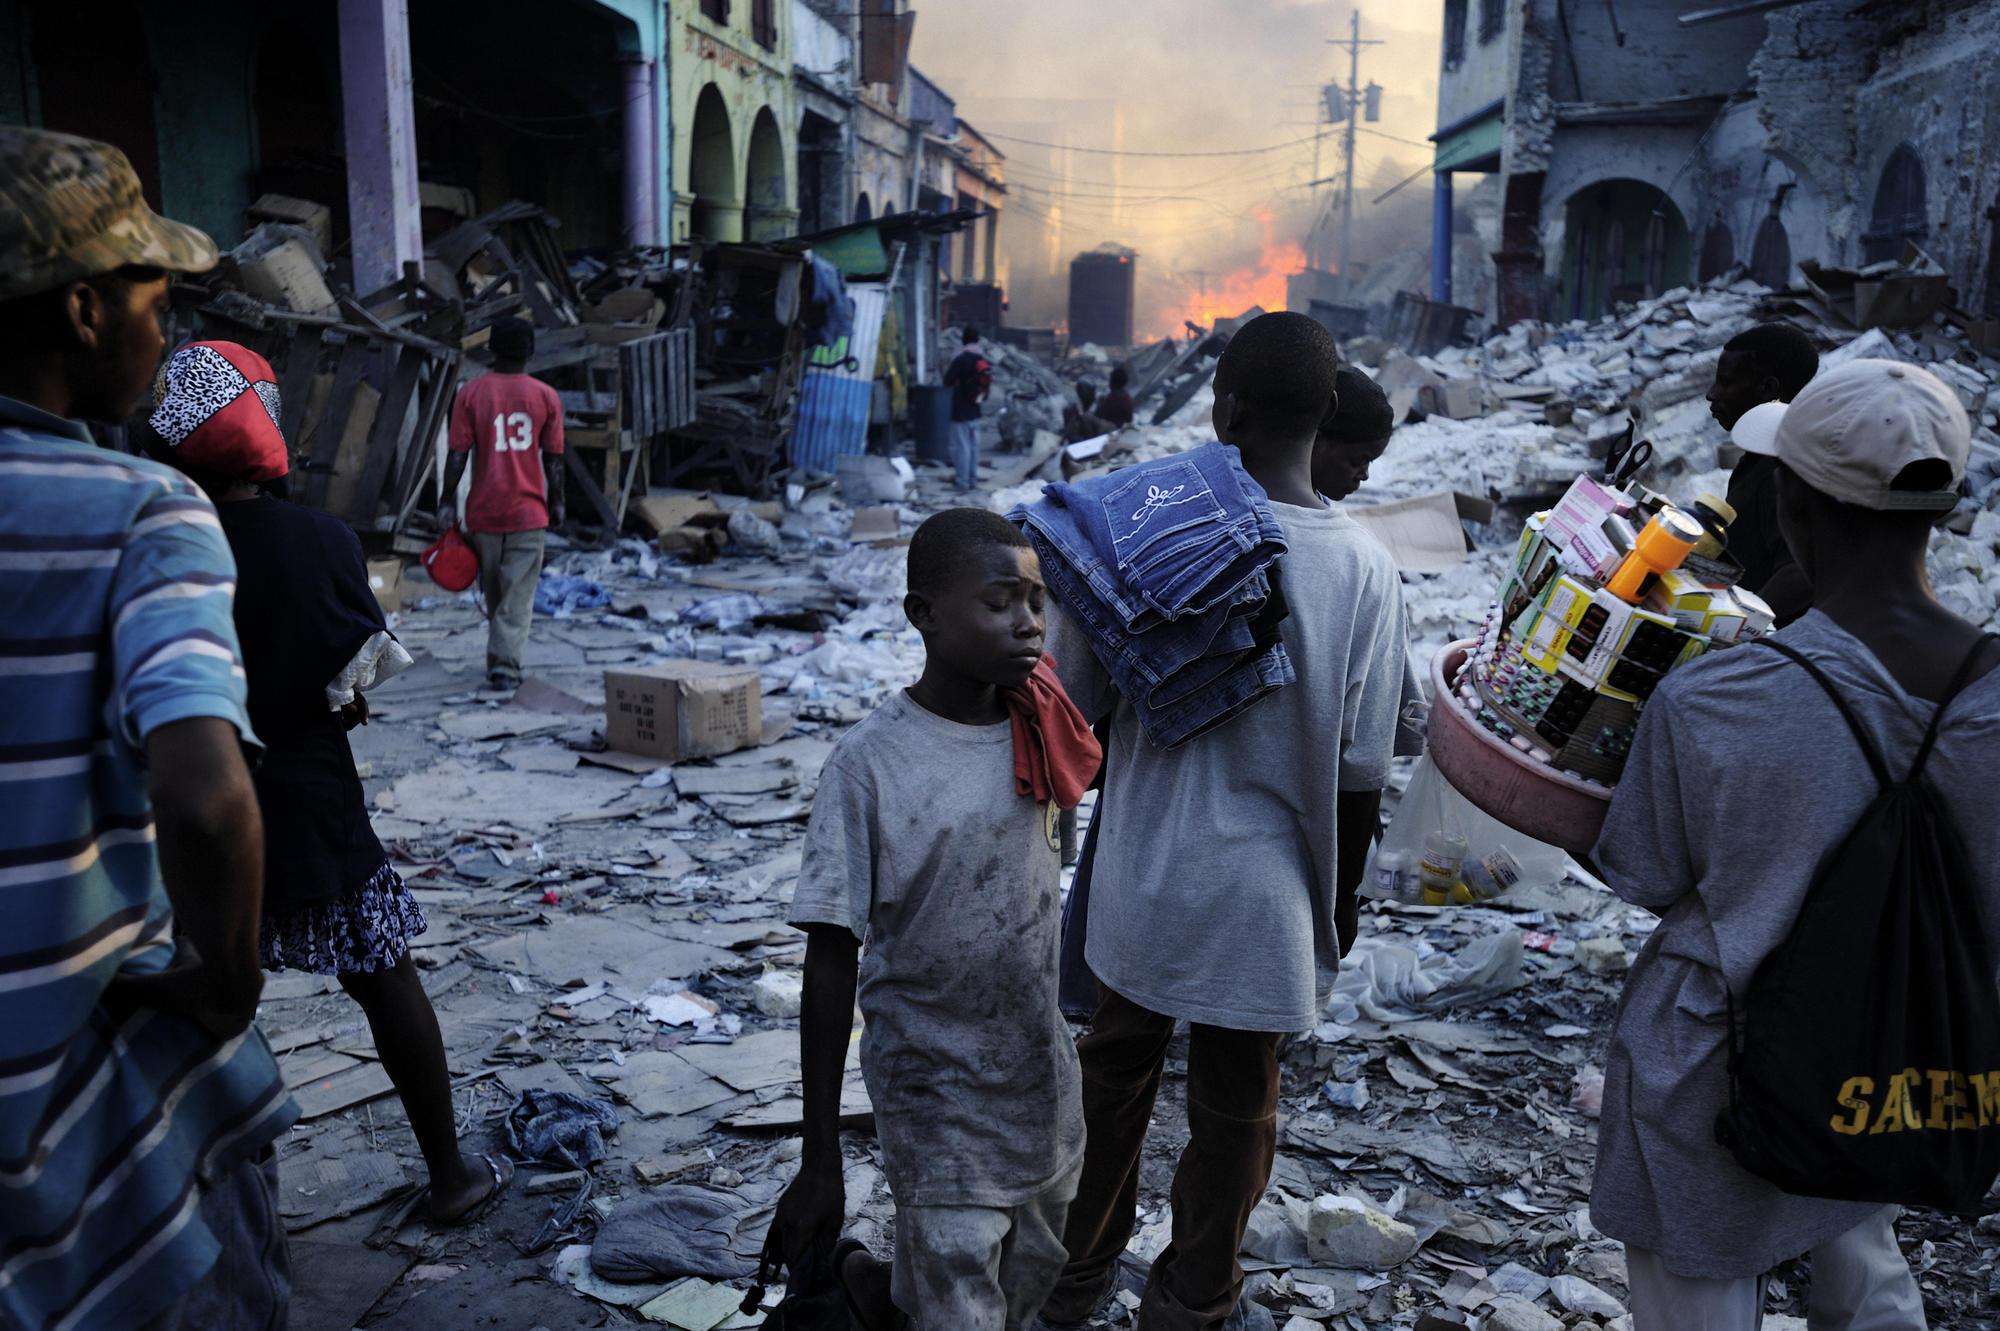 The aftermath of the 2010 earthquake in Port-au-Prince.